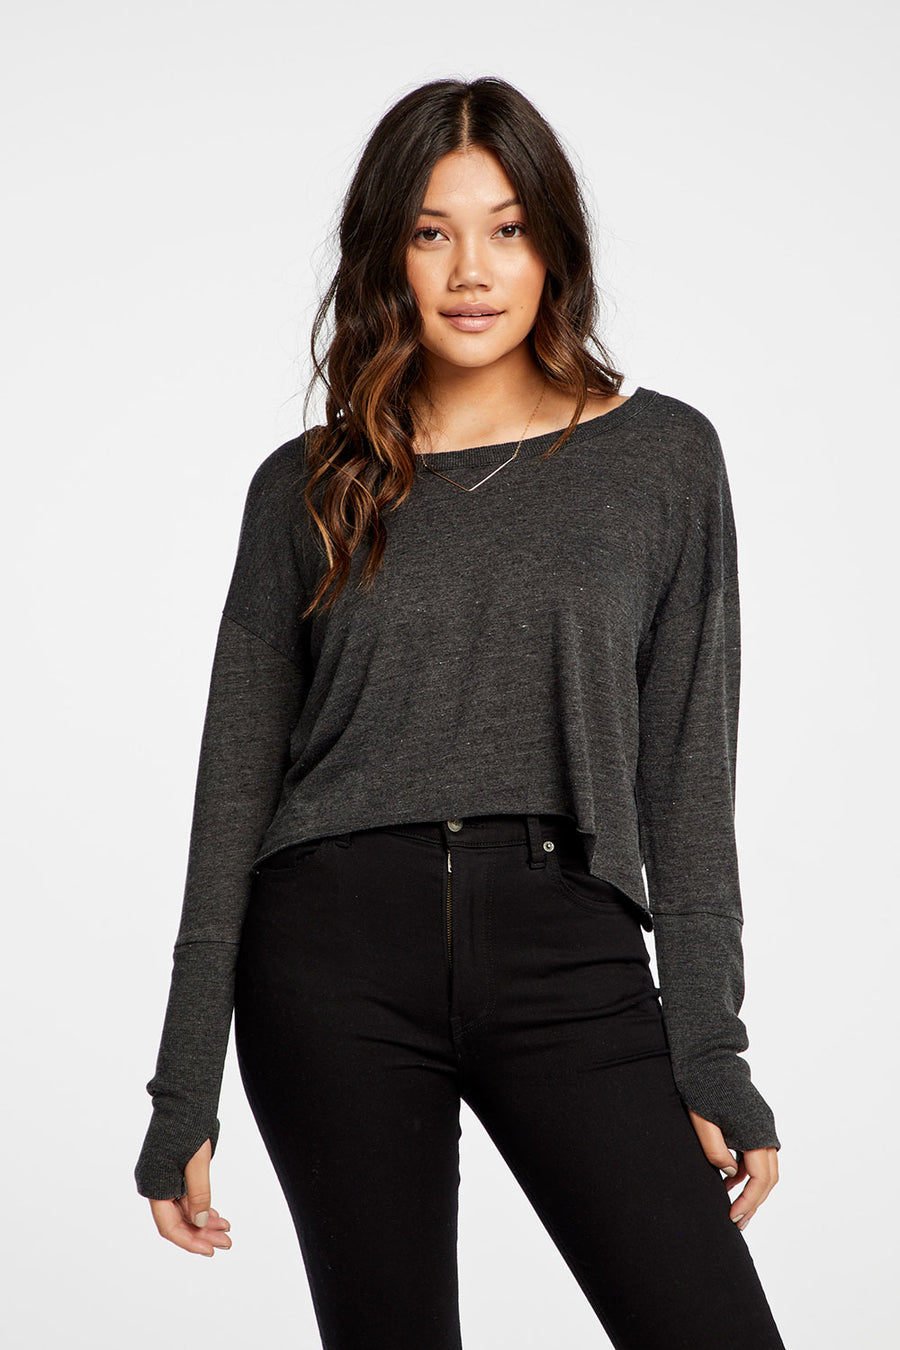 Triblend Jersey Cropped Open Neck Long Sleeve Thumbhole Tee WOMENS - chaserbrand